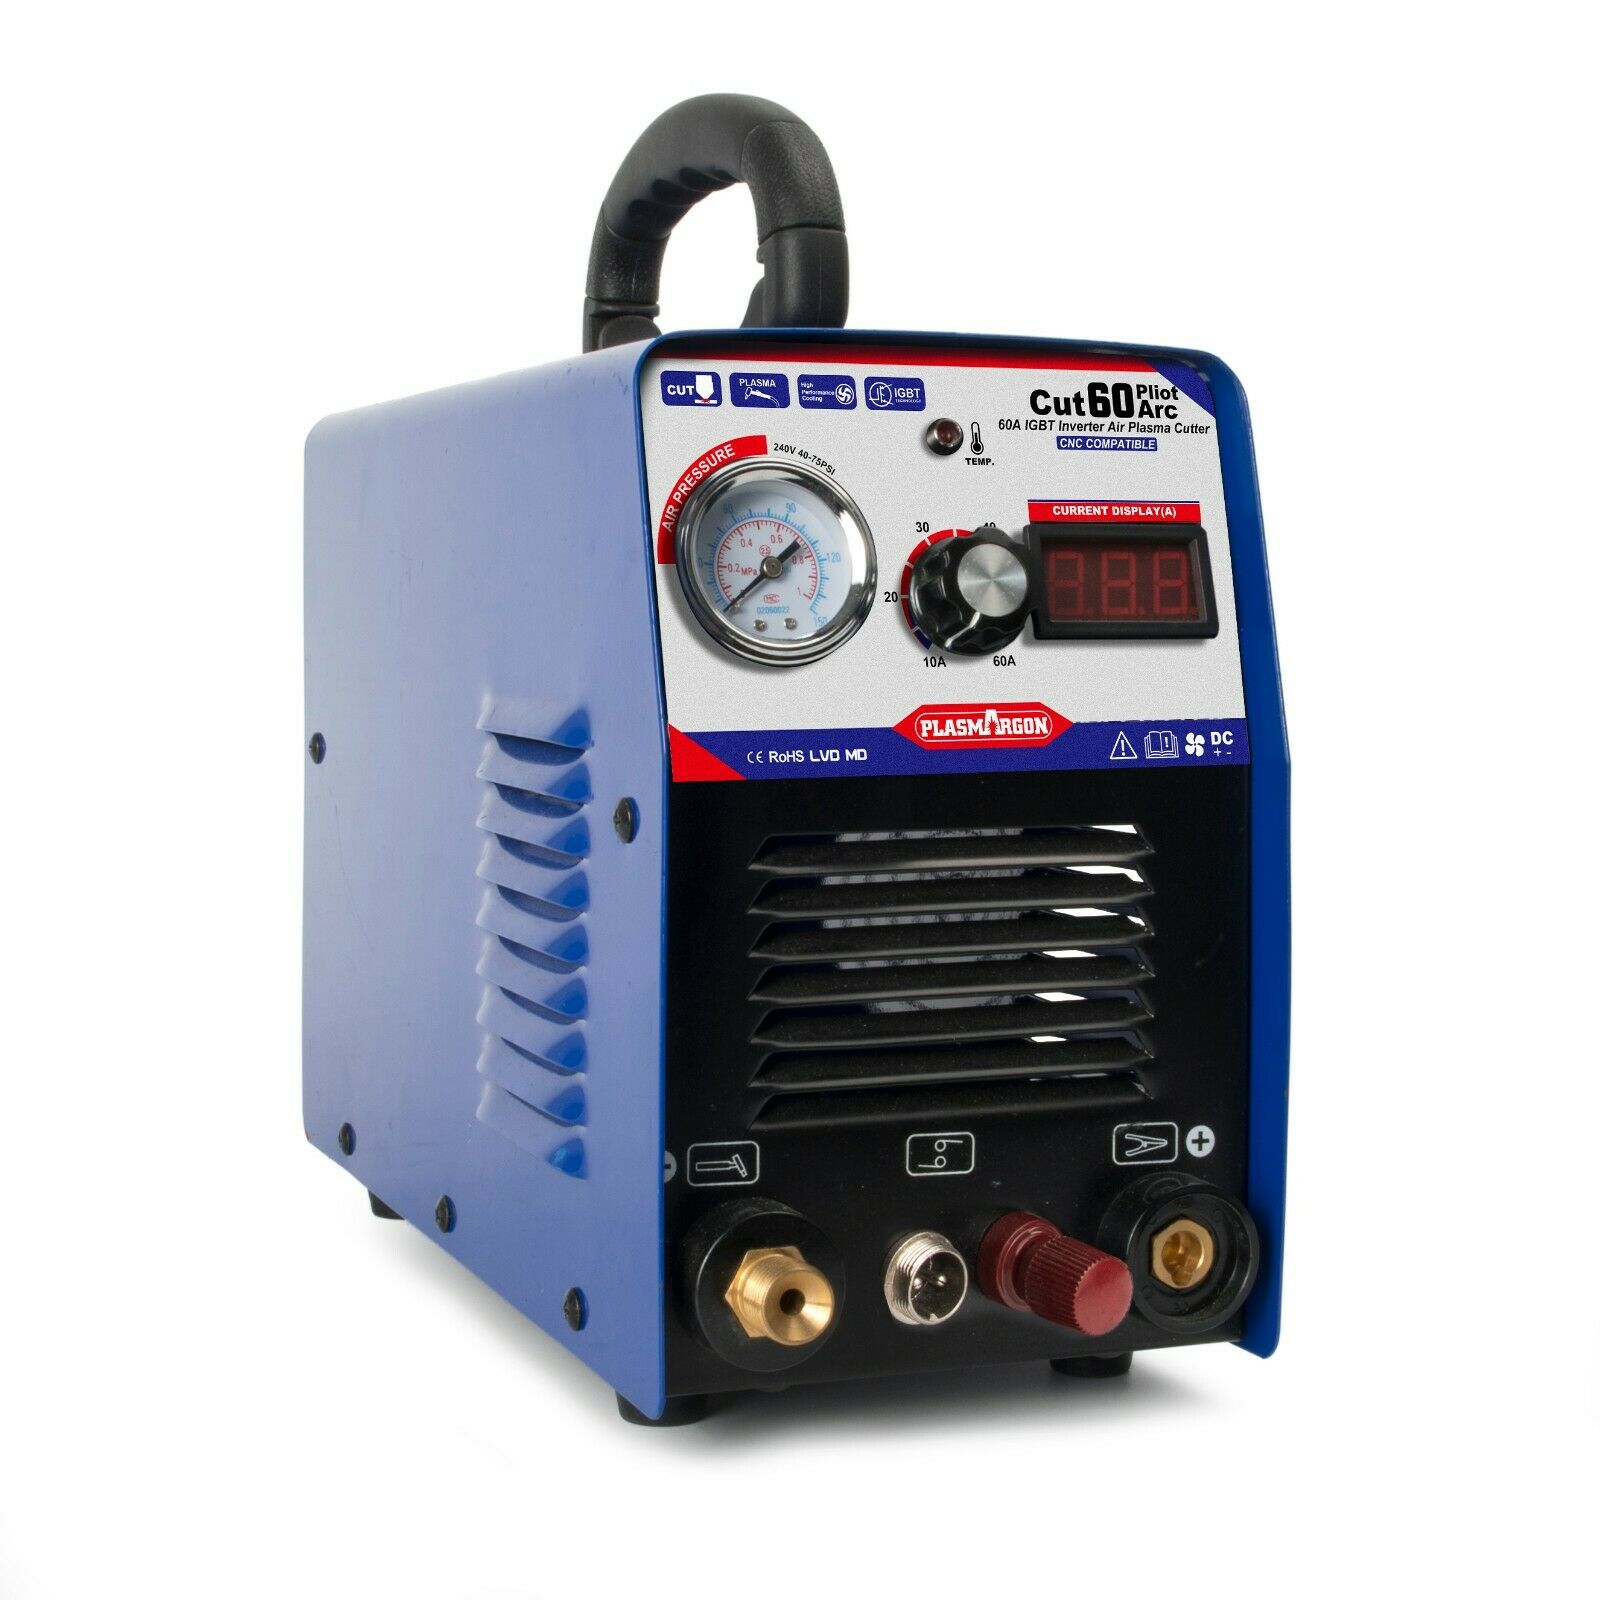 60A Air Plasma Cutter Machine CNC Compatible- Pilot Arc Power UP 1-18mm,110/220v with Free Accessories